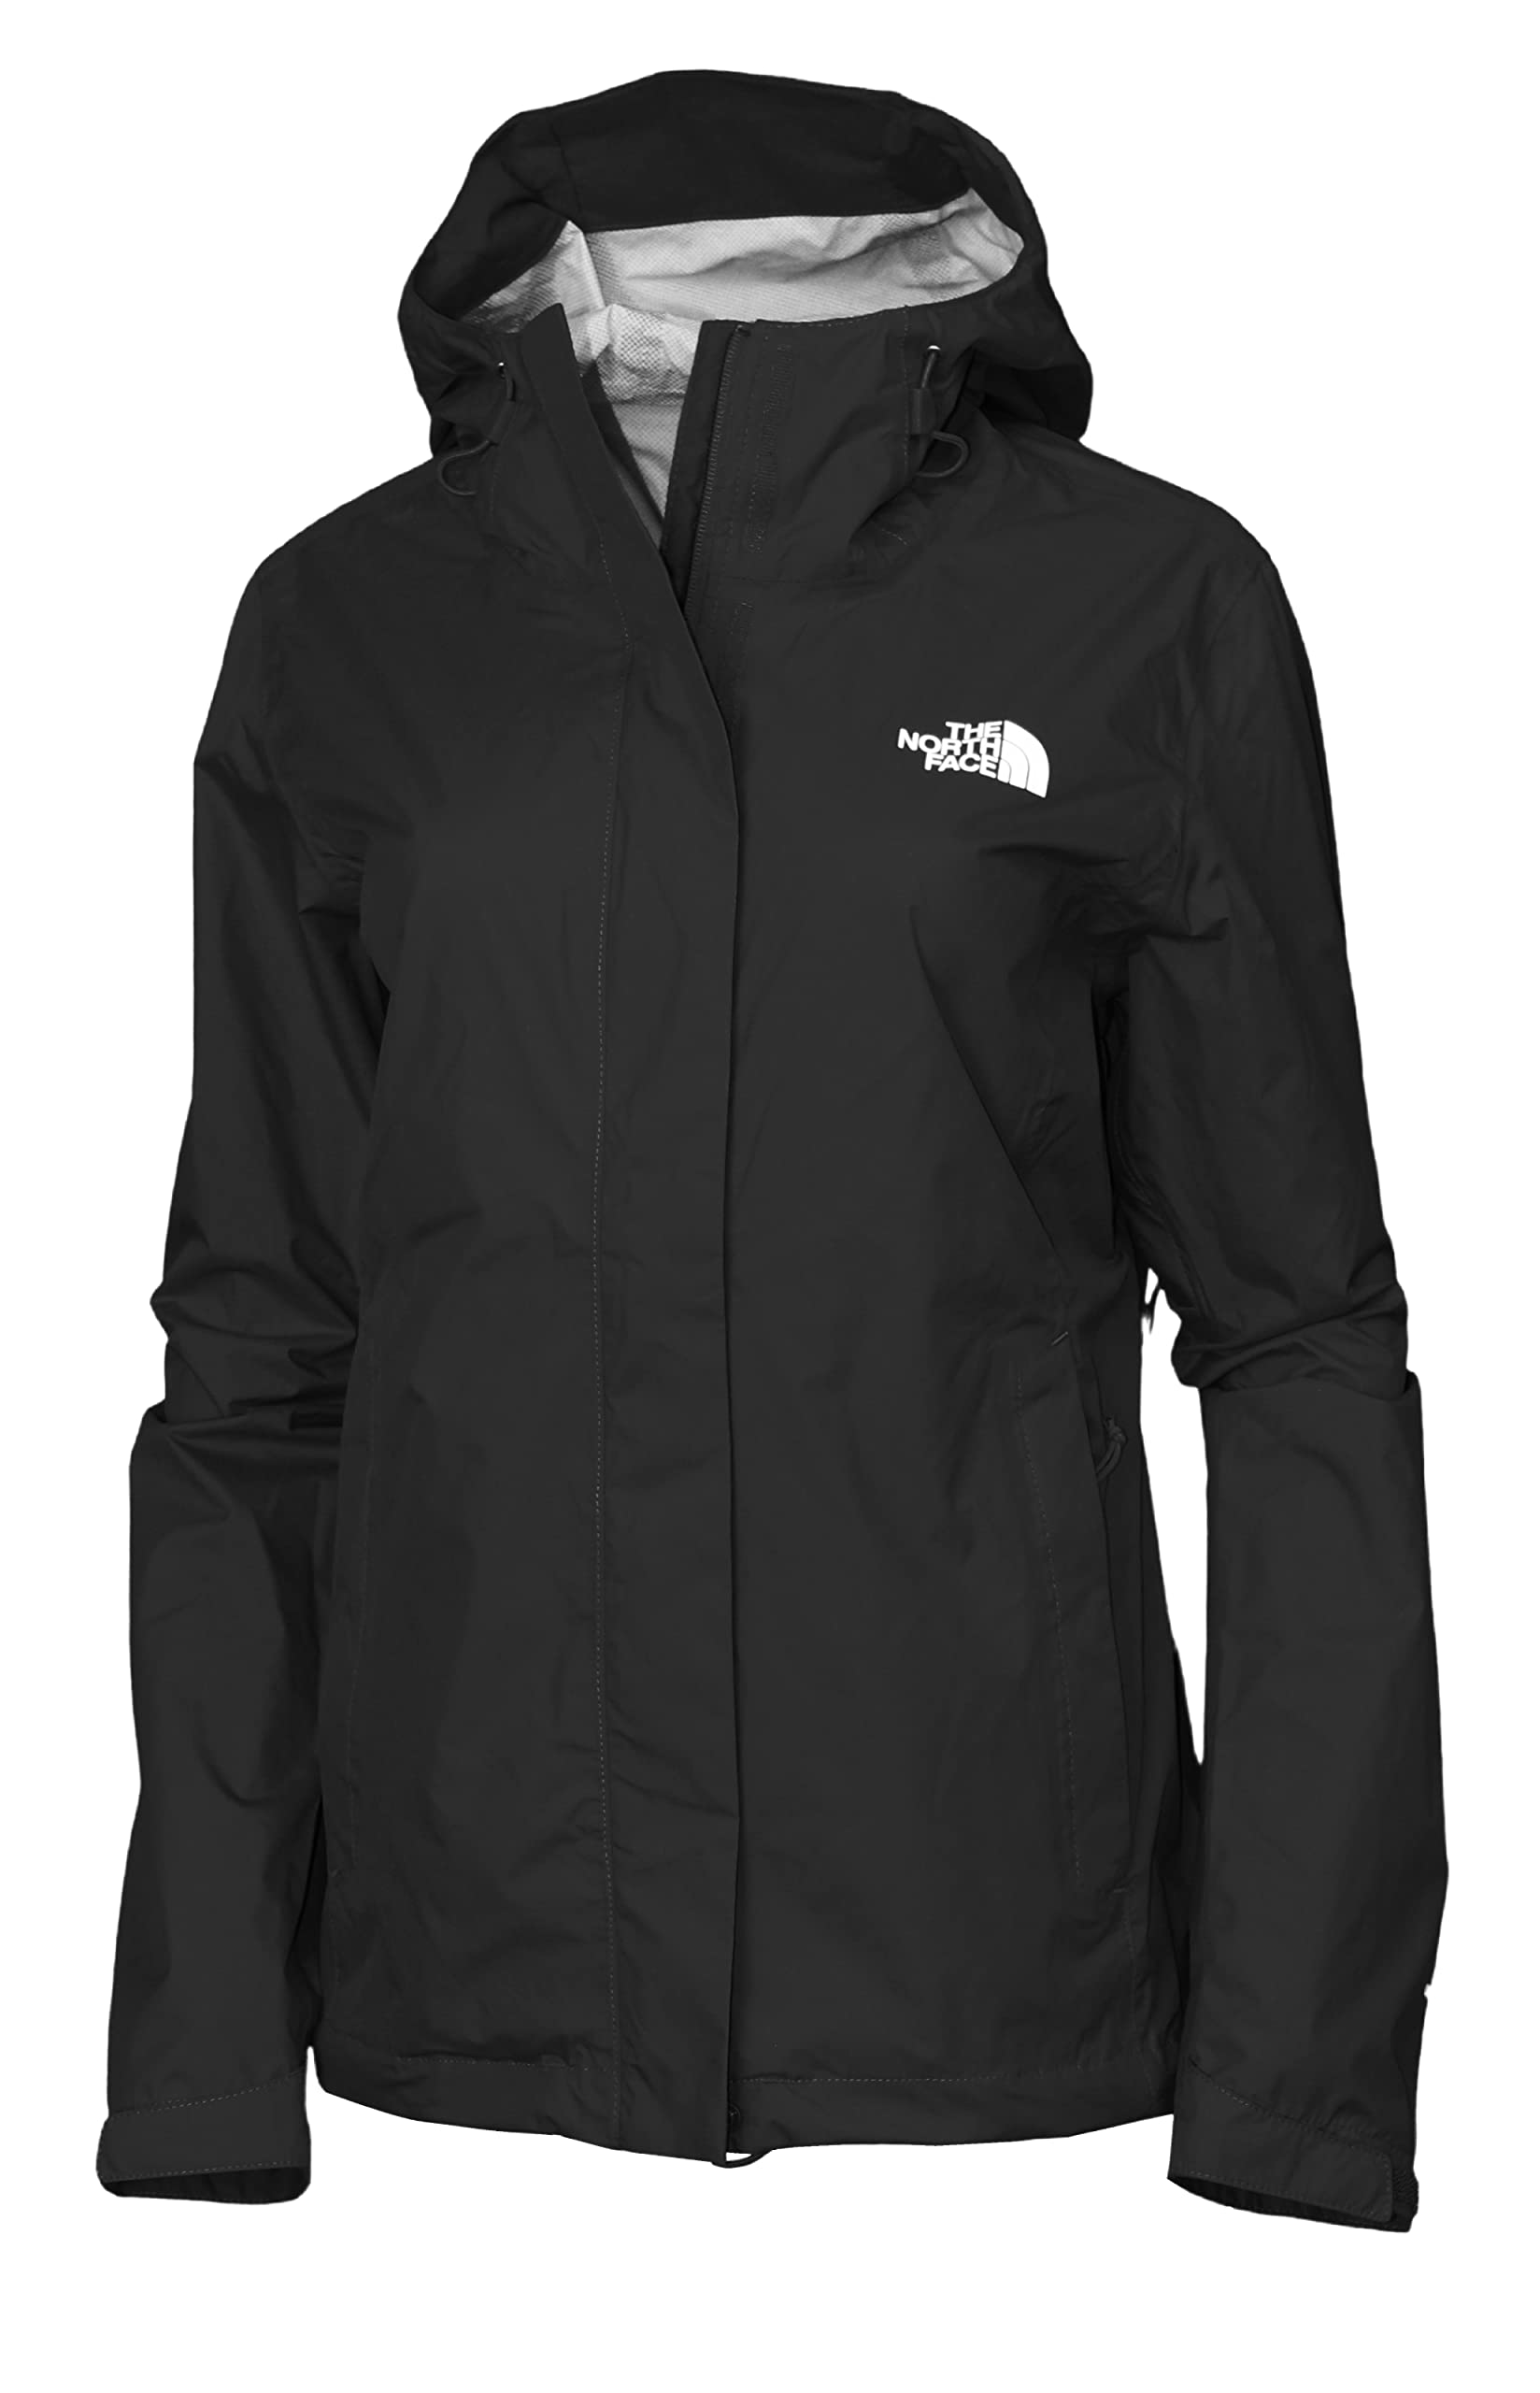 The North Face Women's Venture 2 Dryvent Waterproof Hooded Rain Shell Jacket